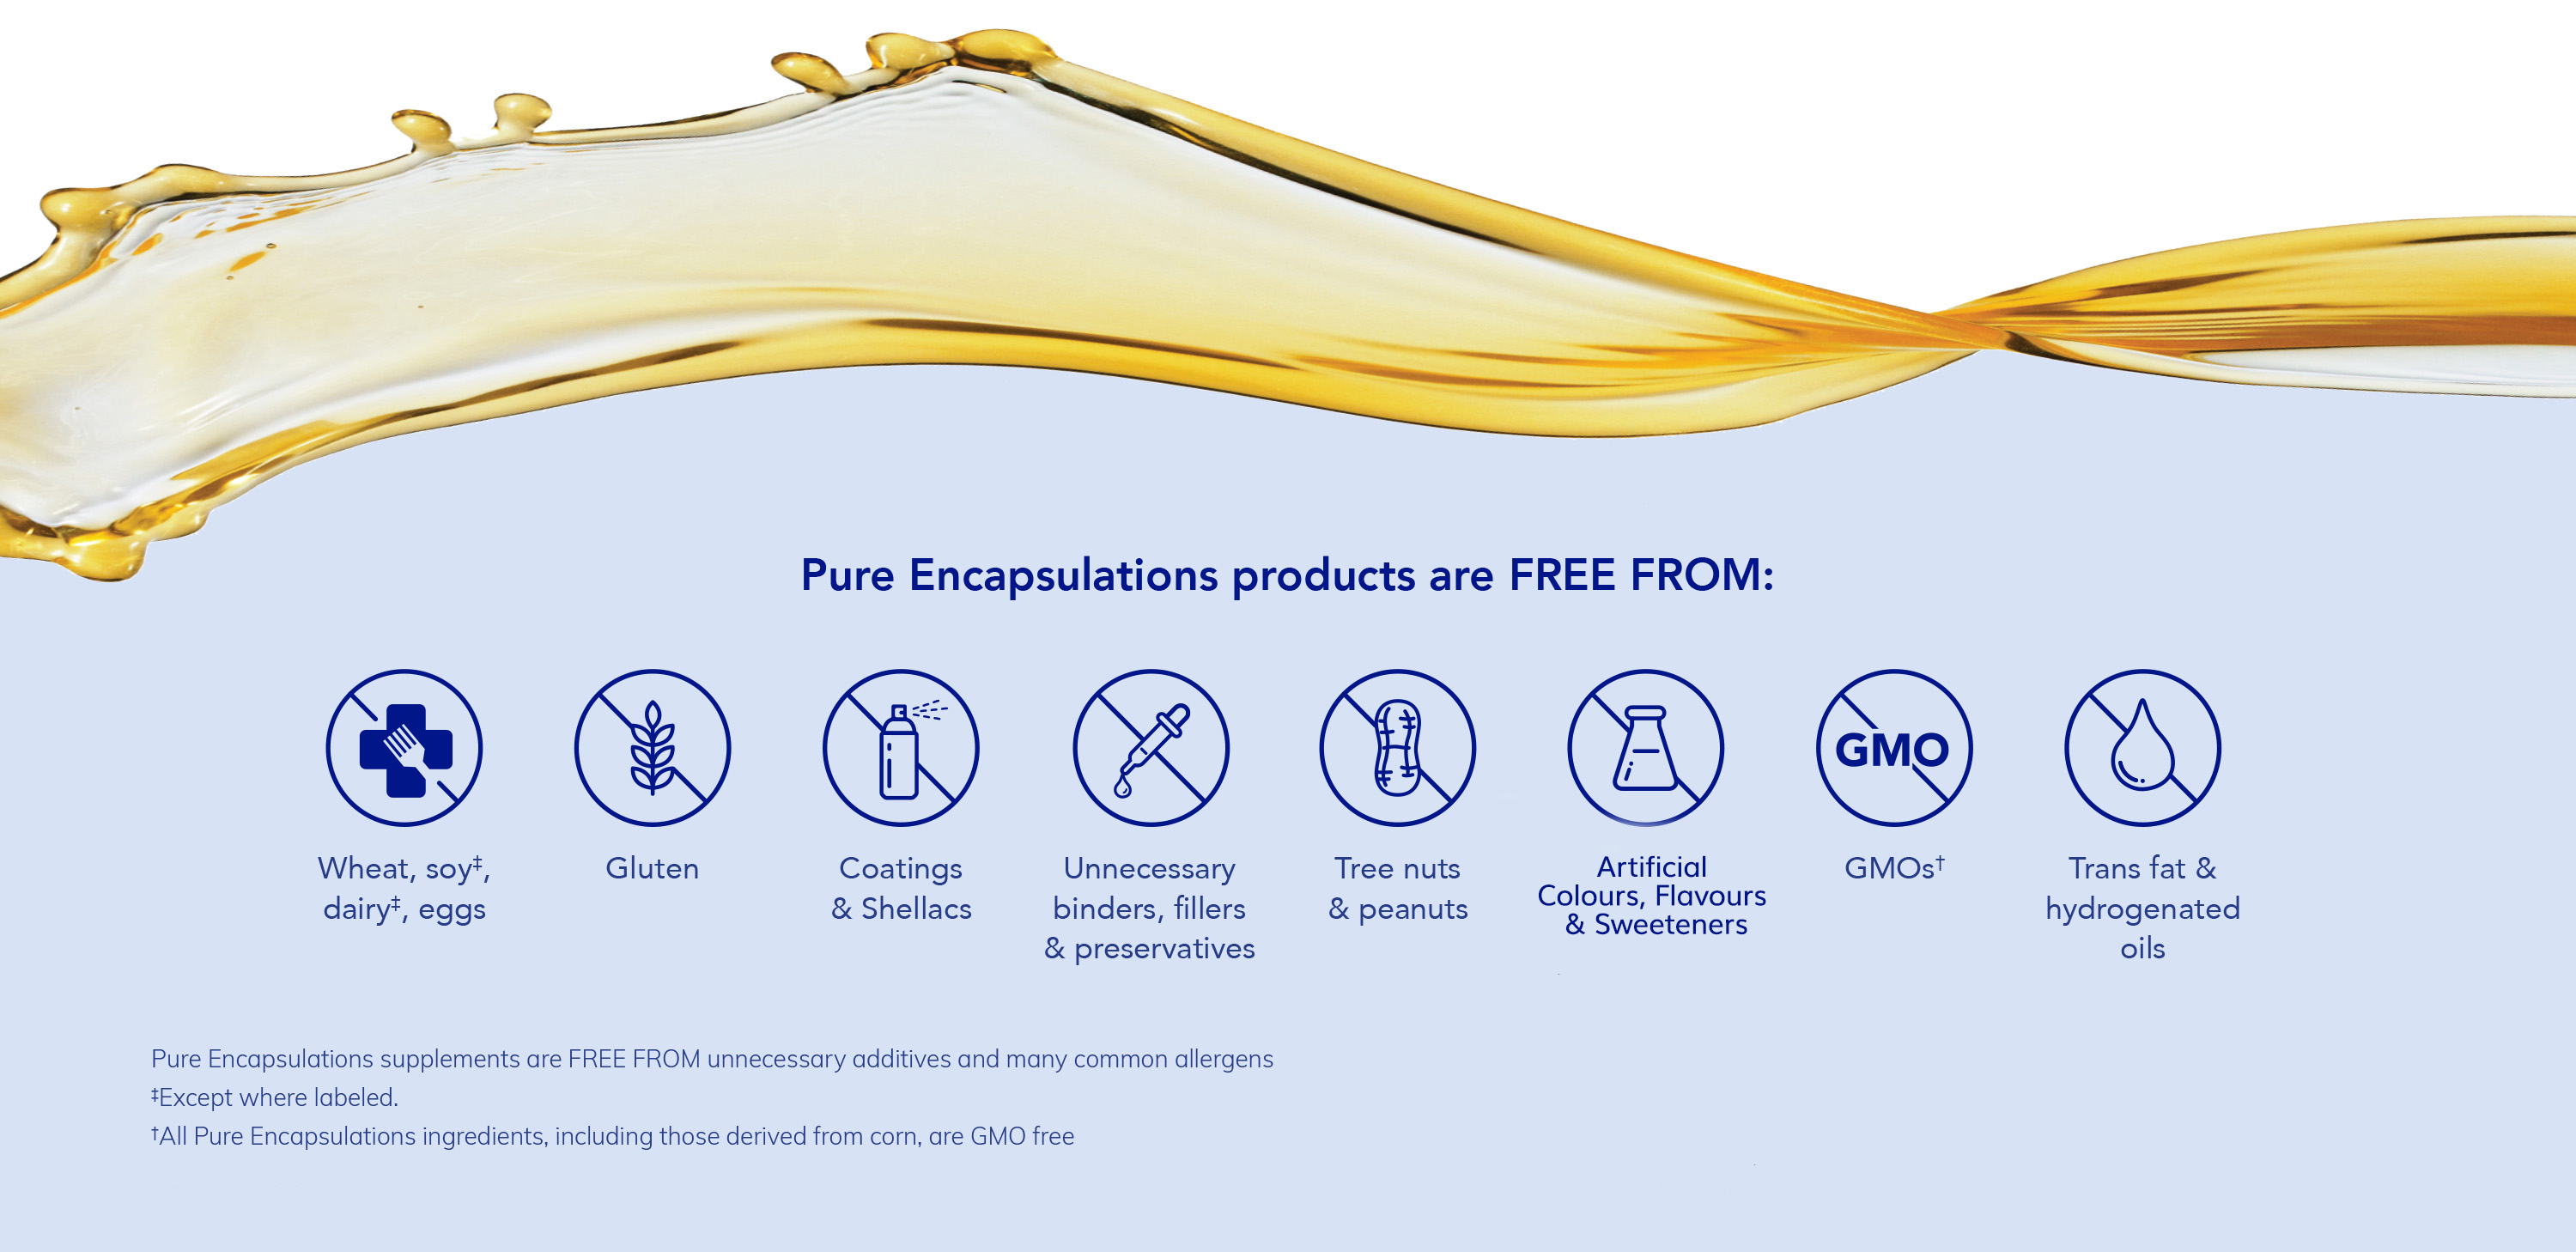 Liquid splash showing that Pure Encapsulations products are free from various ingredients and additives. 